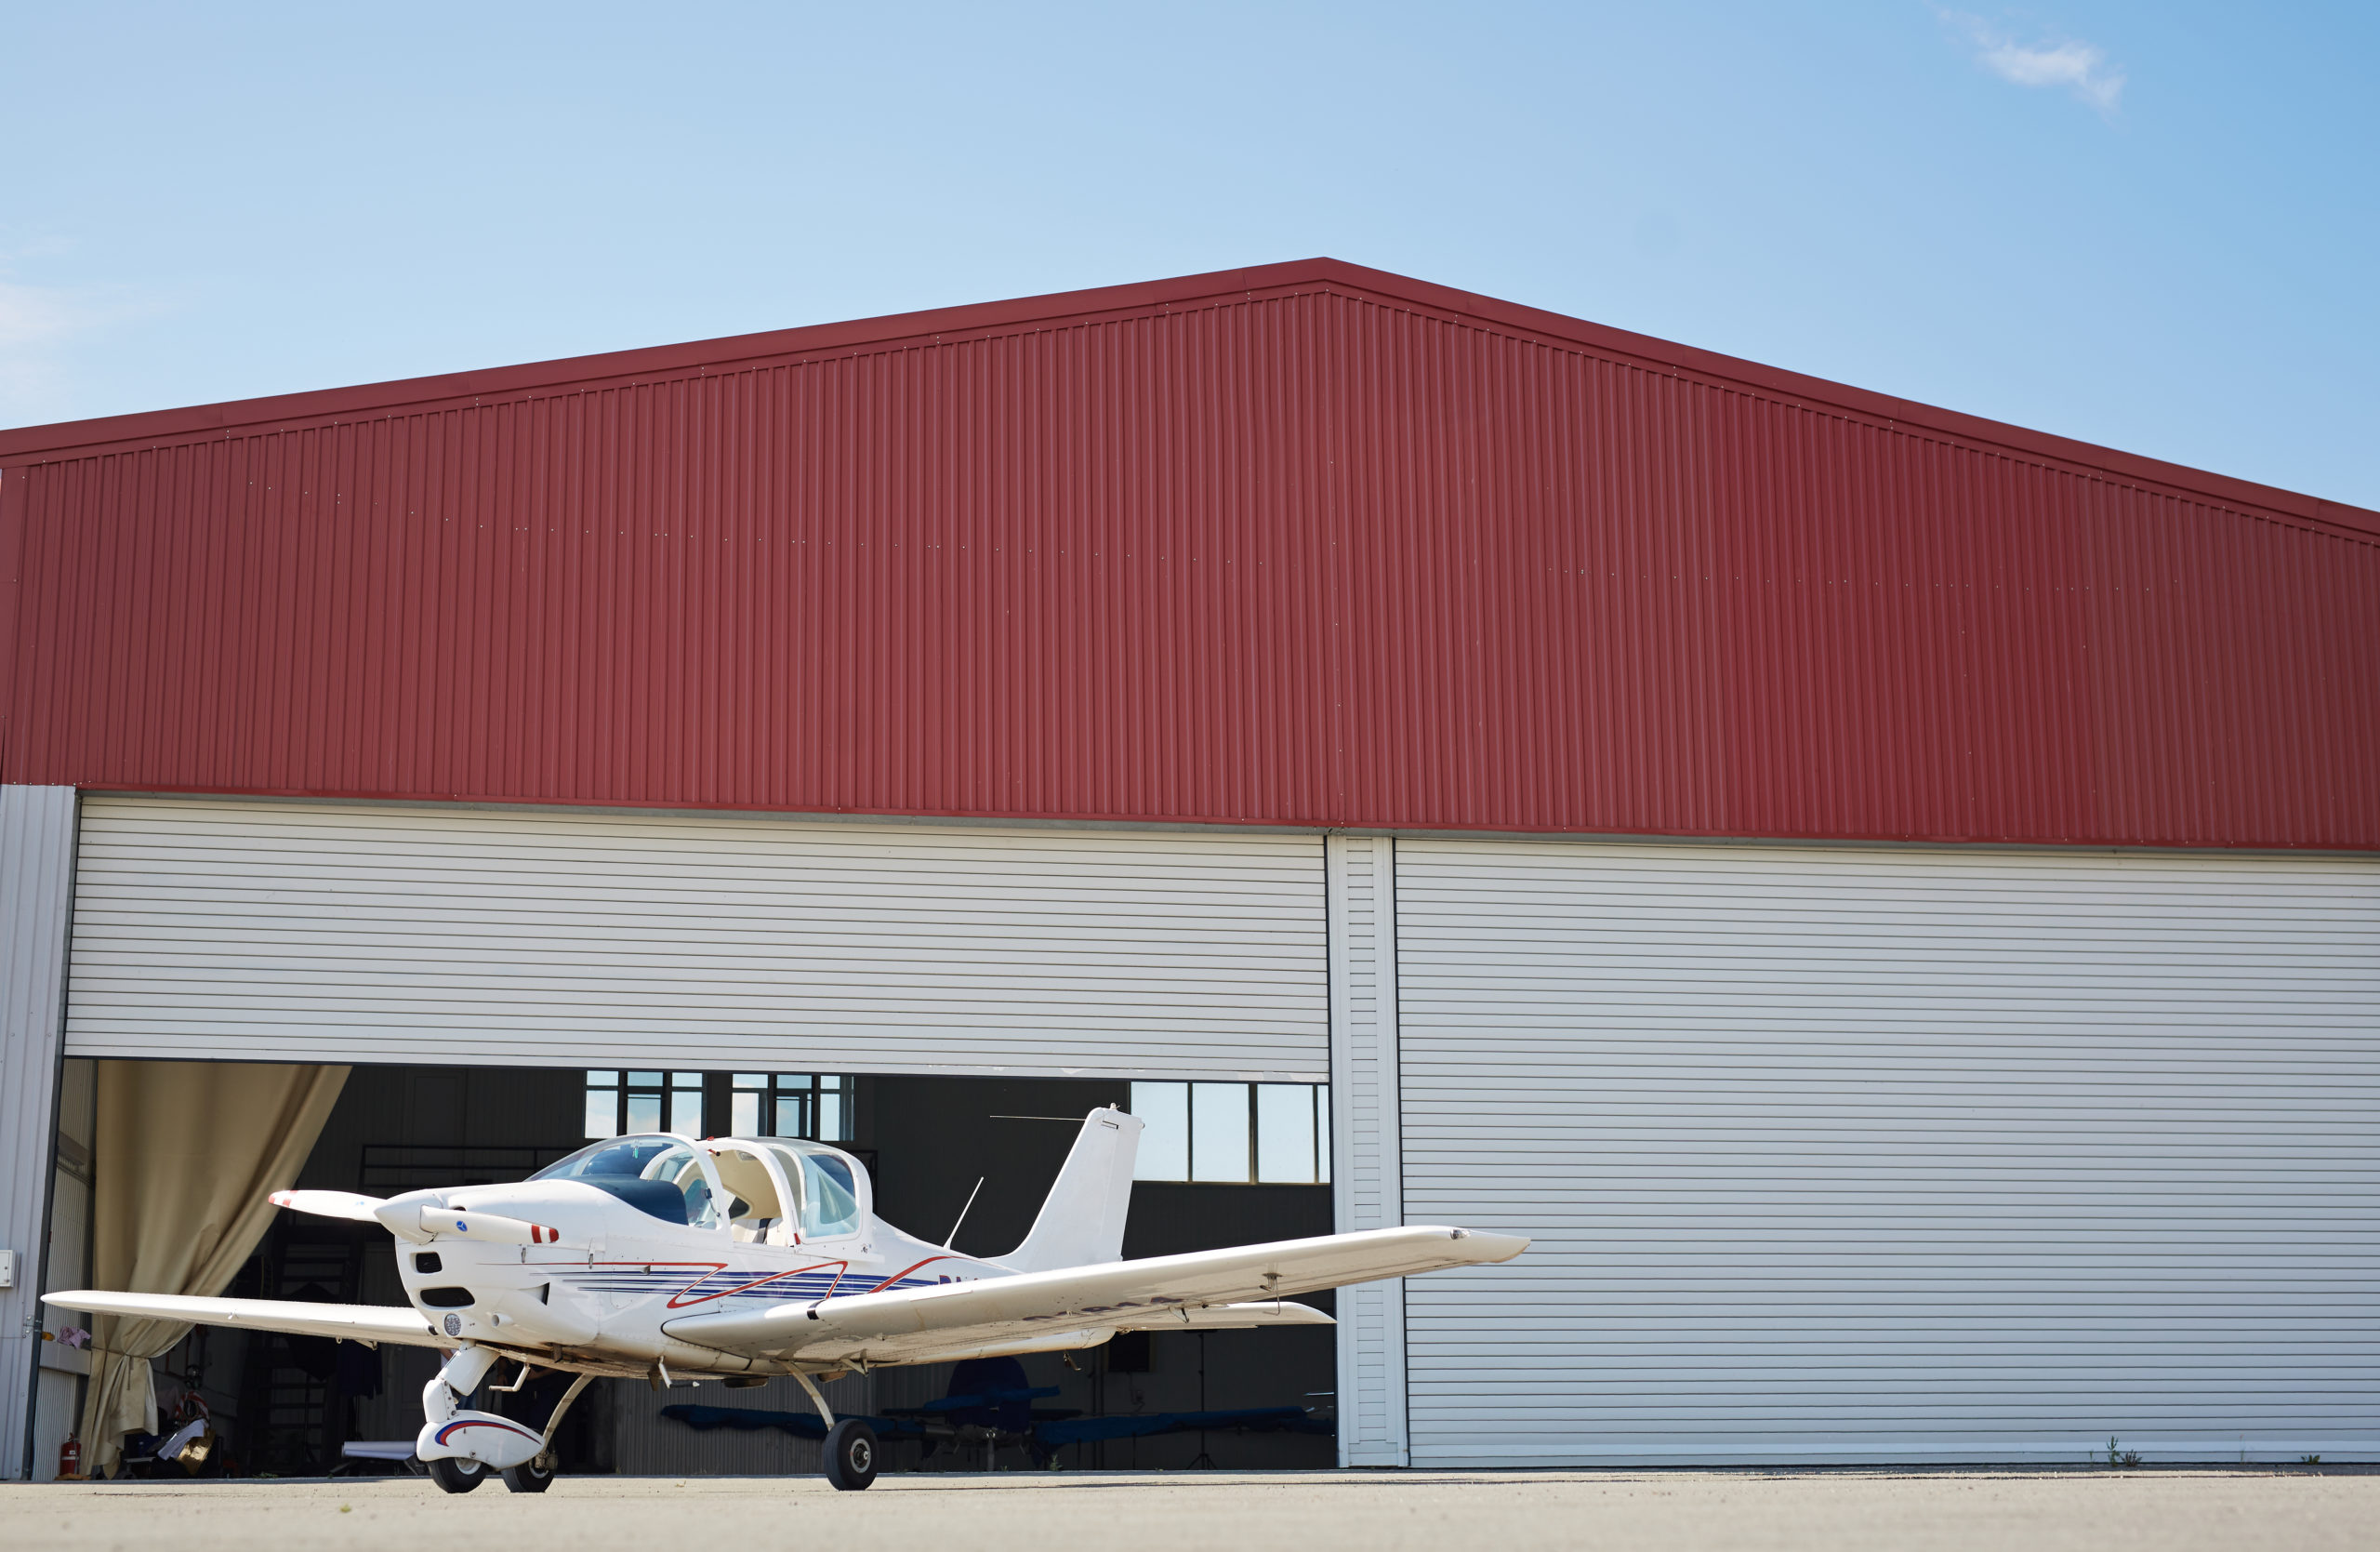 7 Reasons to Invest in a Steel Airplane Hangar